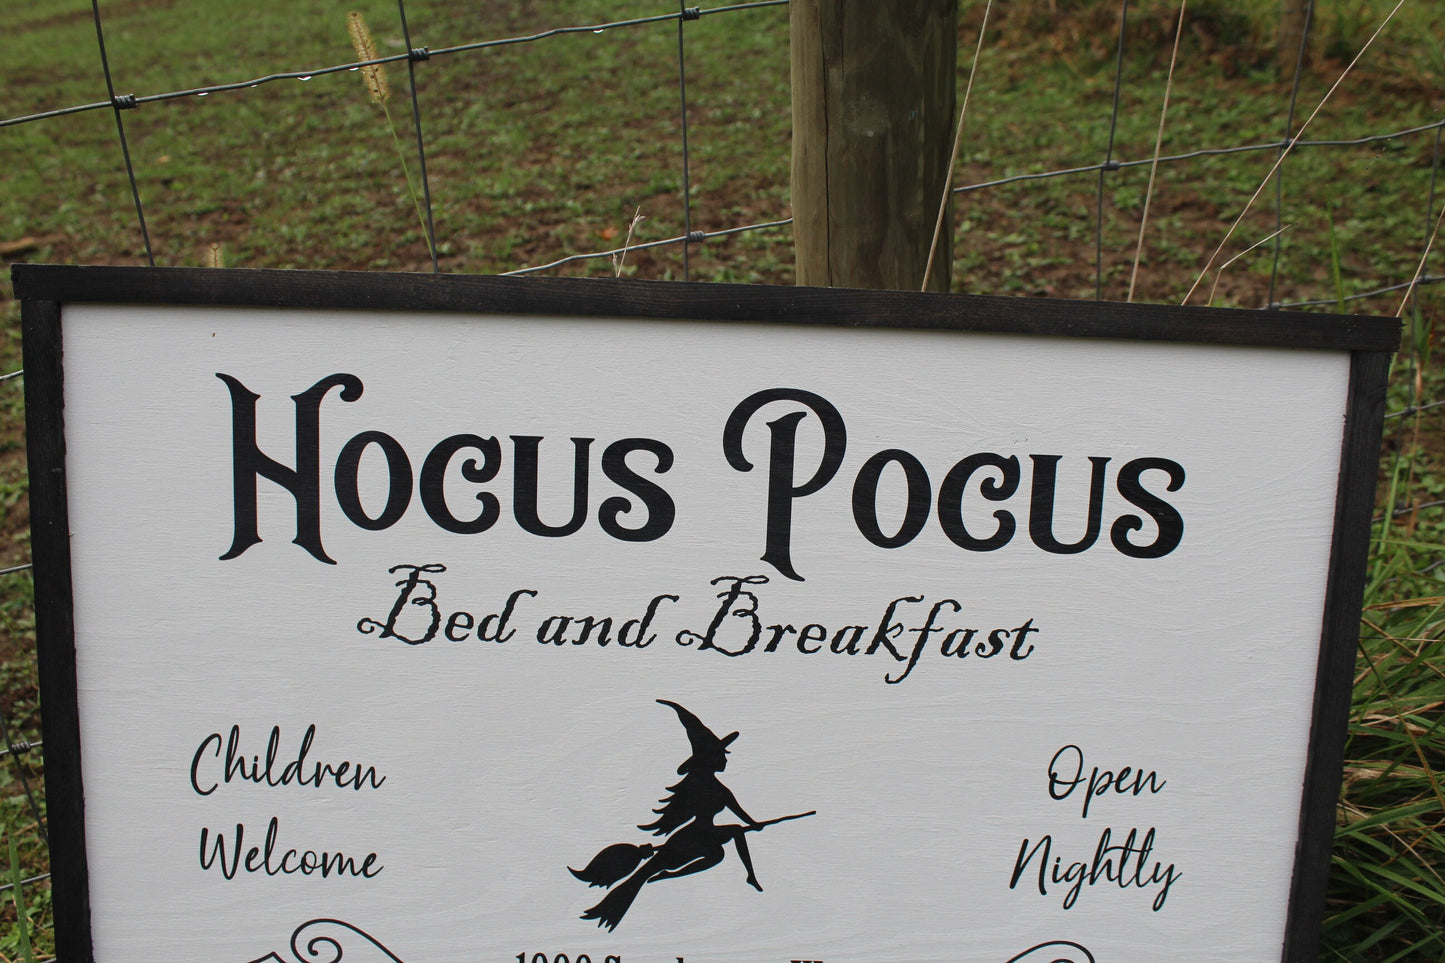 Large Witch Hocus Pocus Wood Sign Sanderson Halloween Black and White Children Welcome Open Nightly Rustic Framed UV Print Porch Decoration